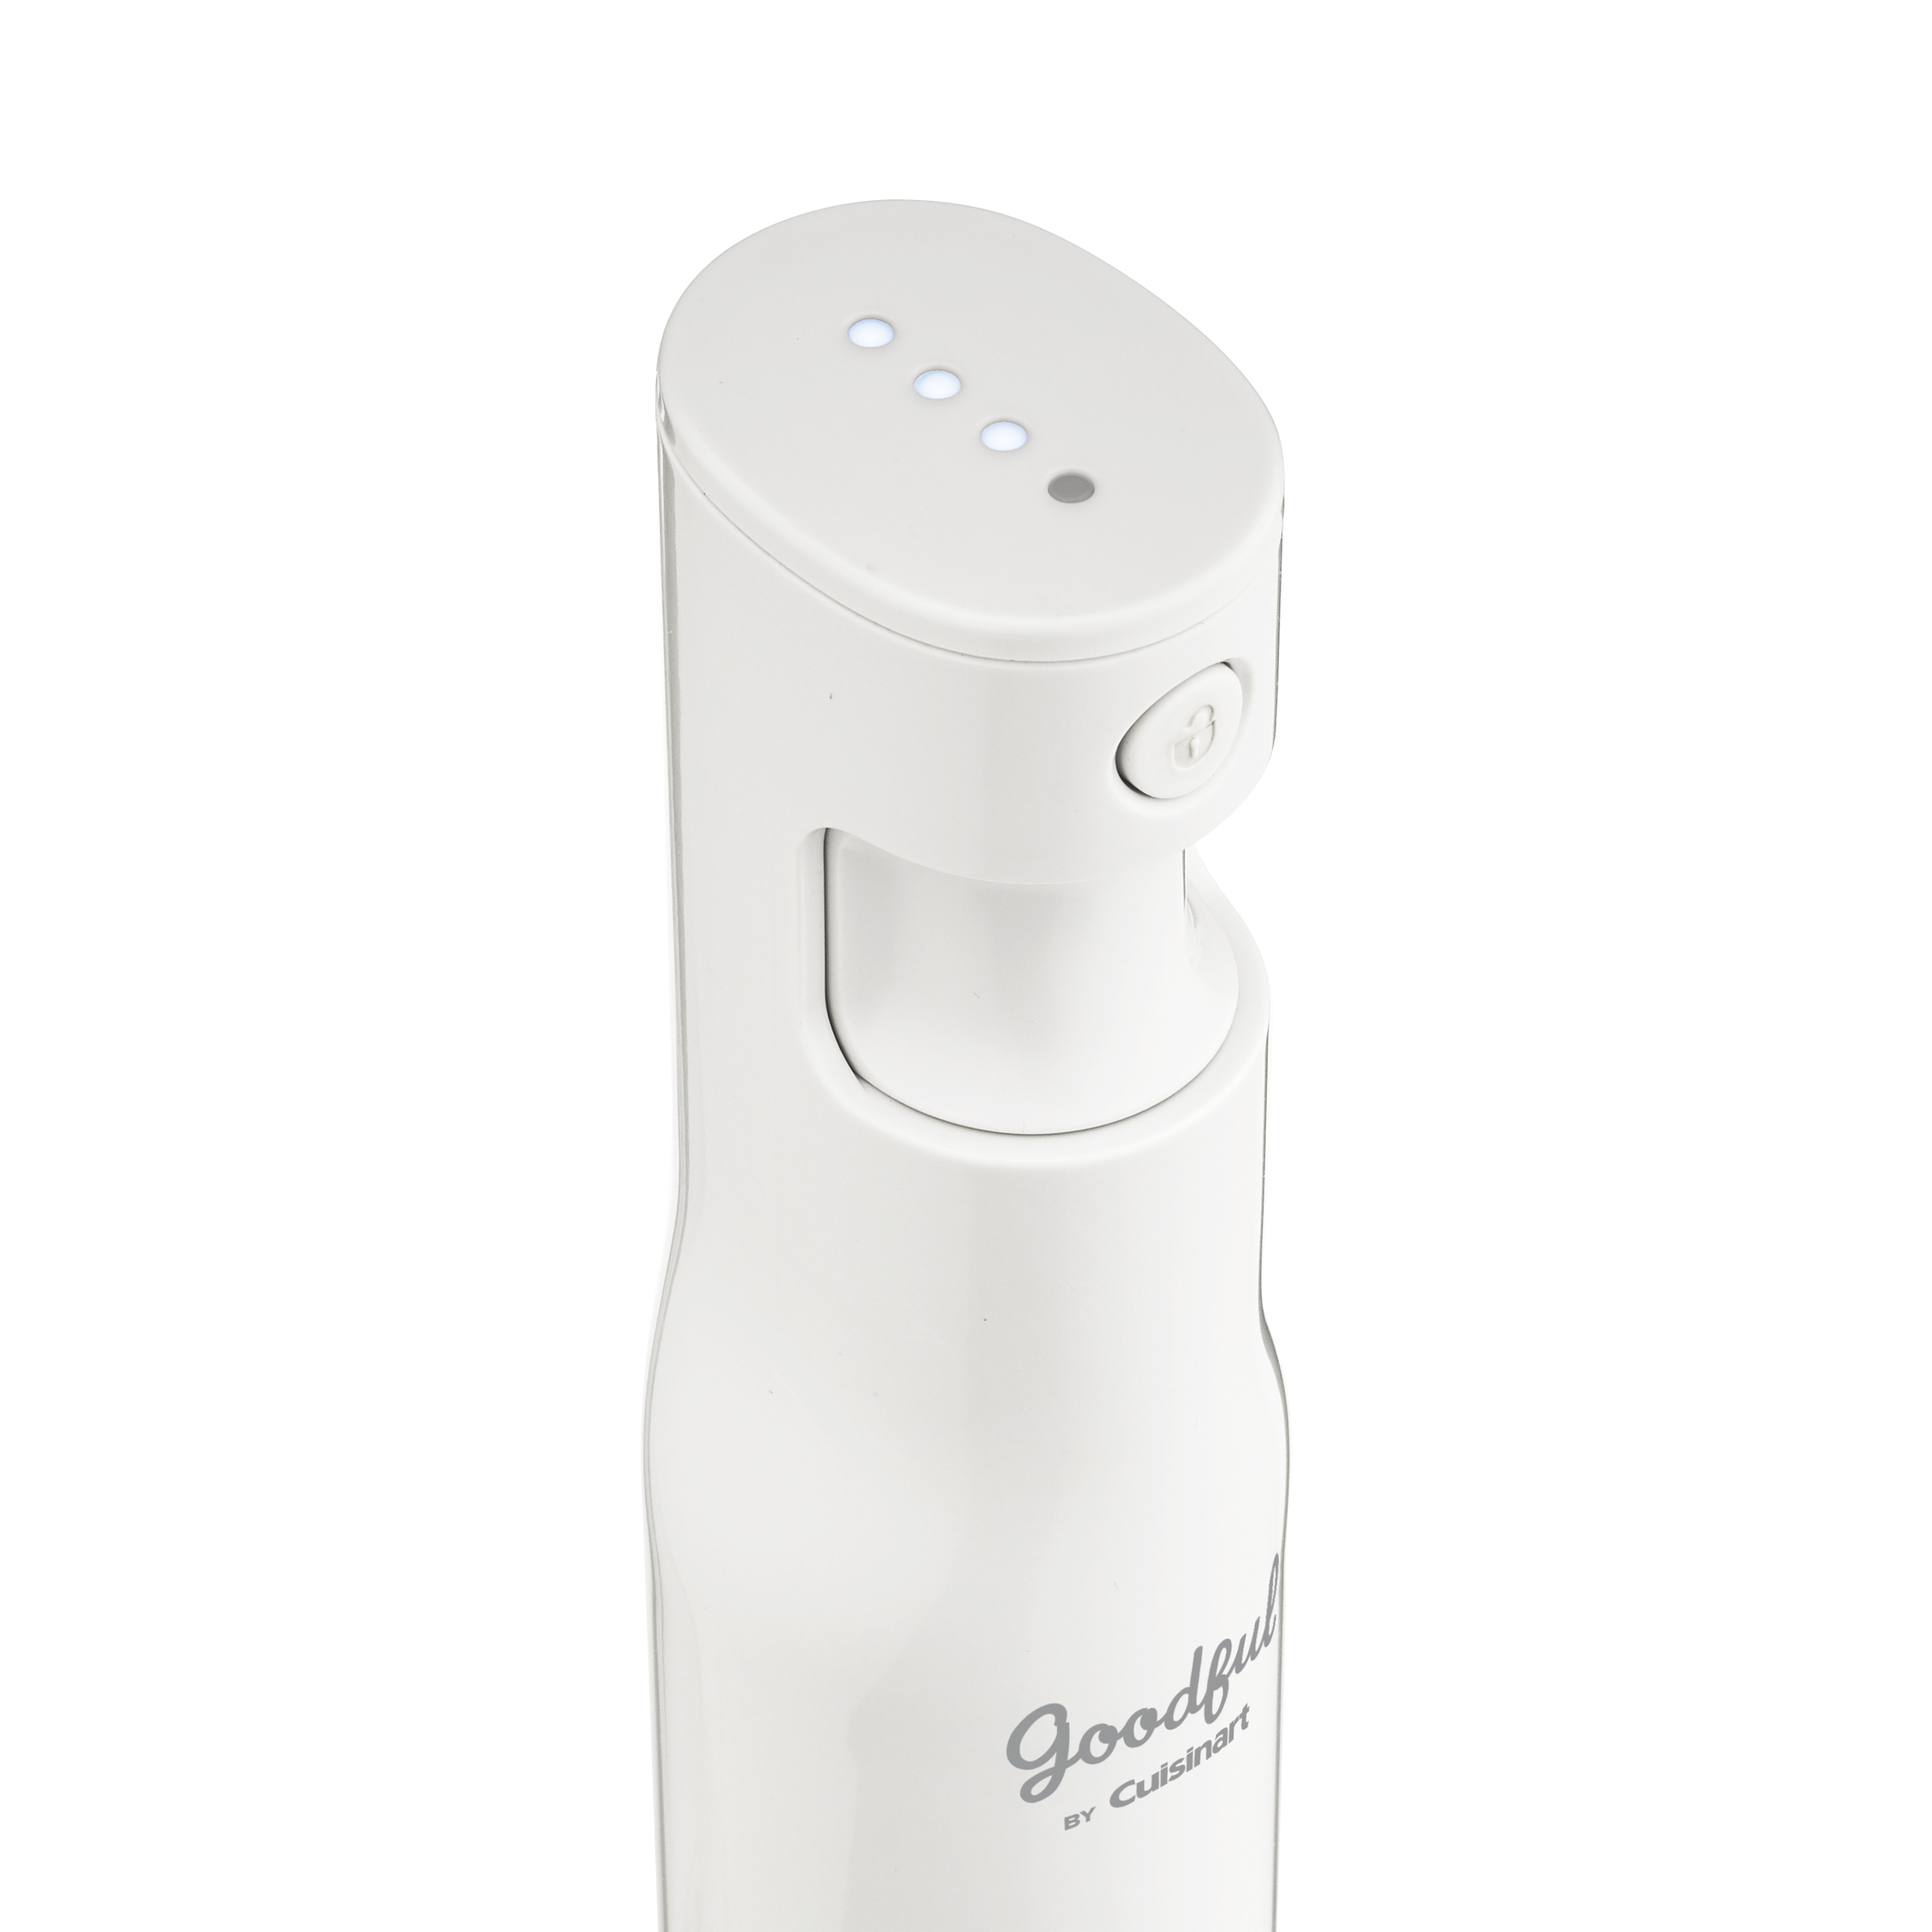 Discontinued Variable Speed Hand Blender with Hand Mixer Attachment